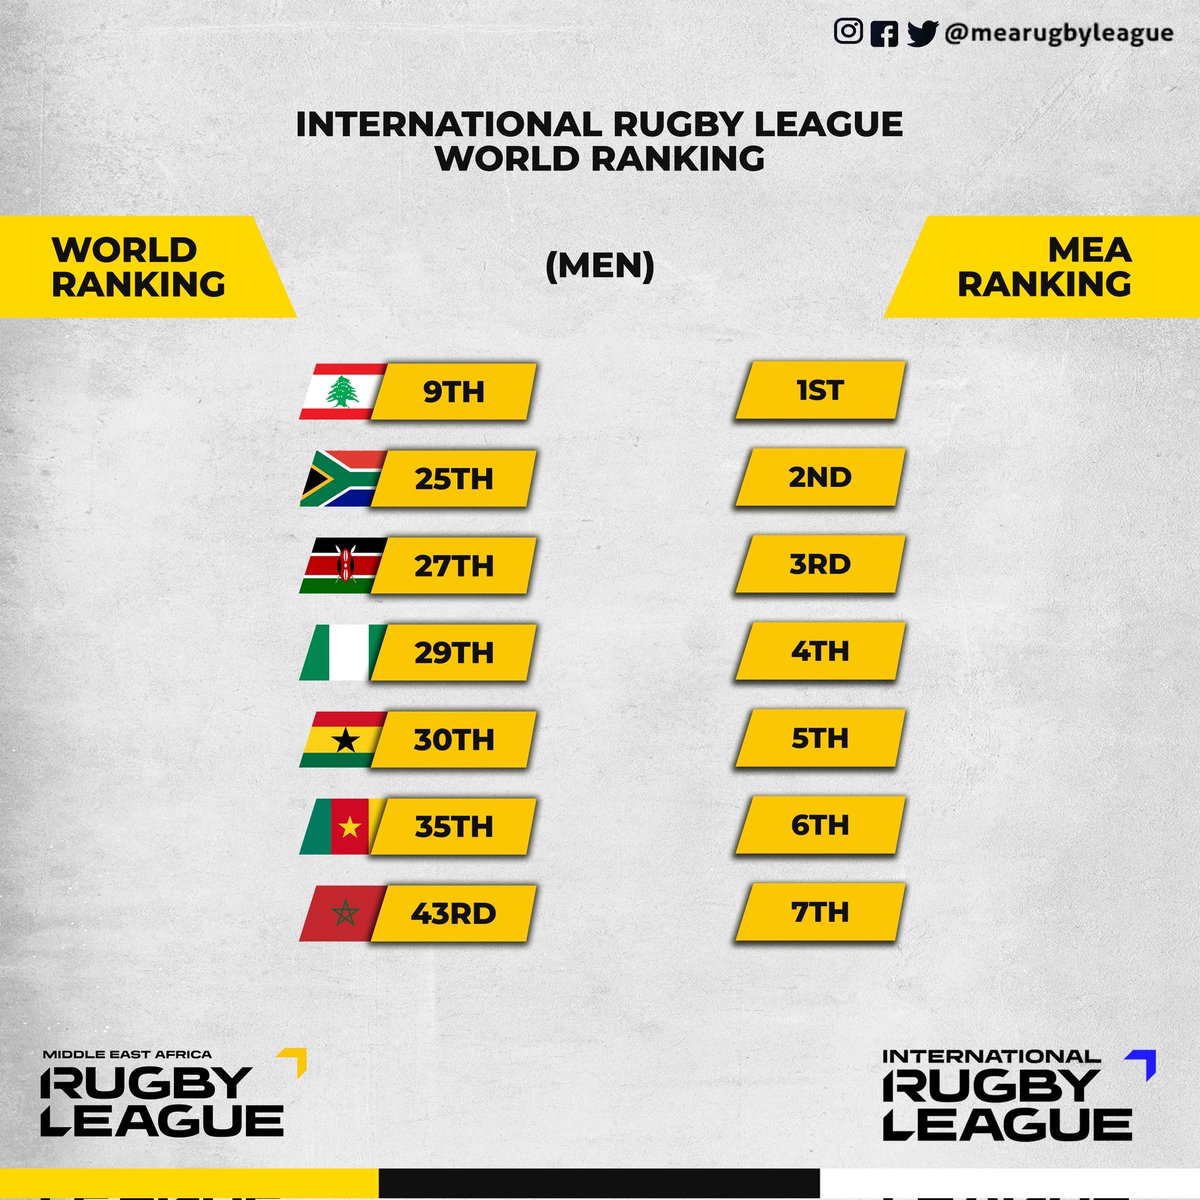 #mearugbyleague 🇱🇧🏉🇿🇦🏉🇰🇪🏉🇳🇬🏉🇬🇭🏉🇺🇬🏉🇨🇲🏉🇲🇦 🏉🚀 The Middle East African Rugby League is on fire! 🔥 Men's teams soaring, and for the FIRST time, Women's Rugby League teams make their mark in the IRL World rankings! 🌟 📰bit.ly/3NZgSpF